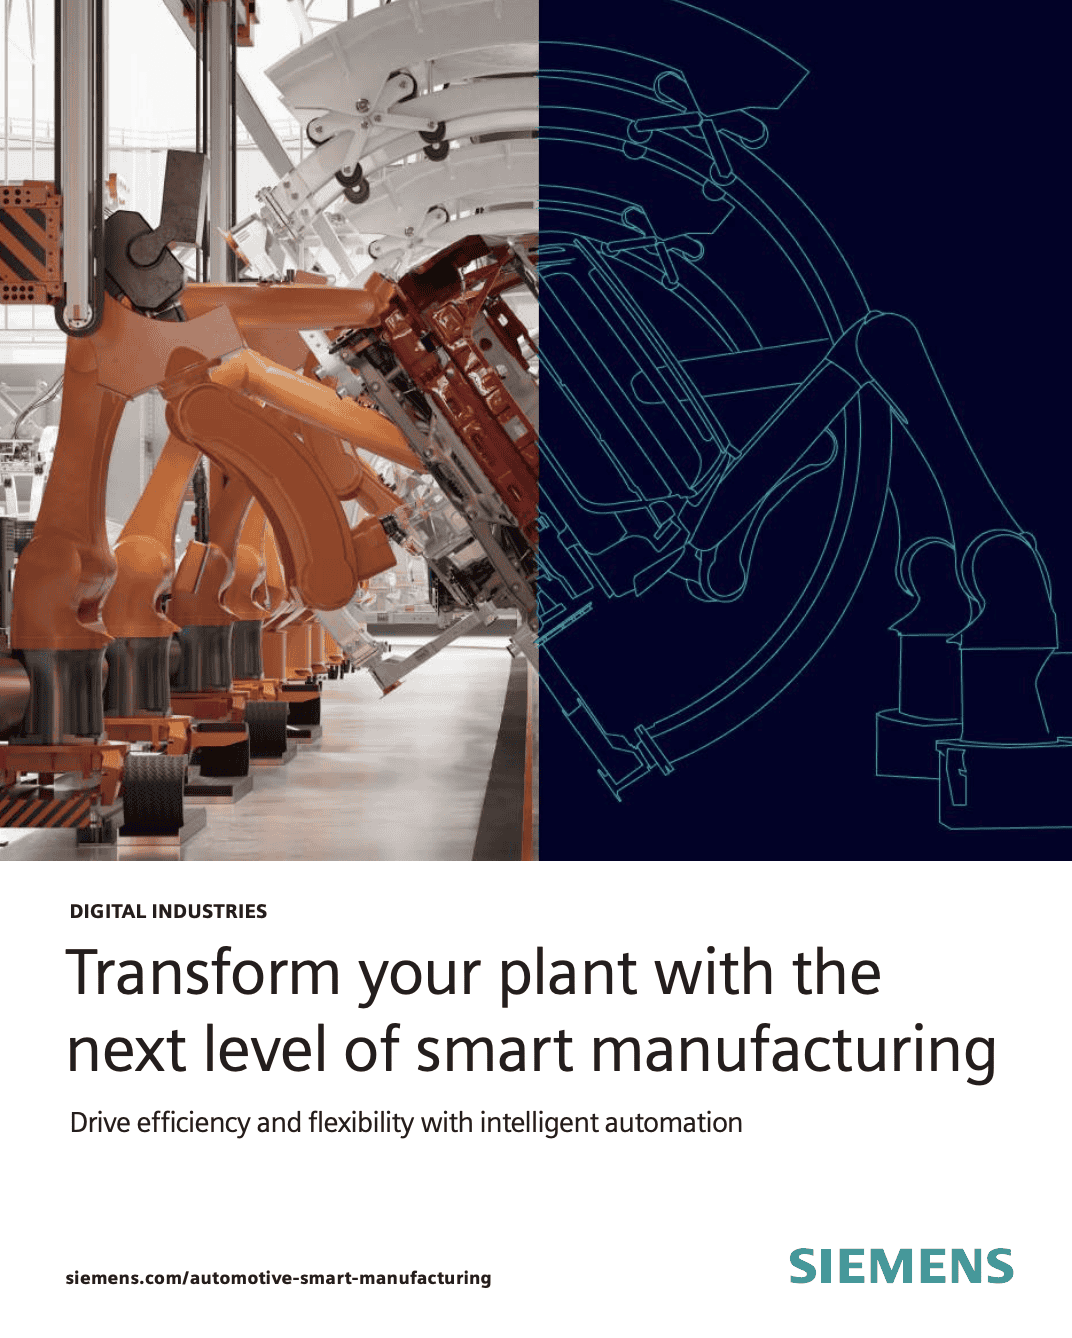 Transform your plant with the next level of smart manufacturing